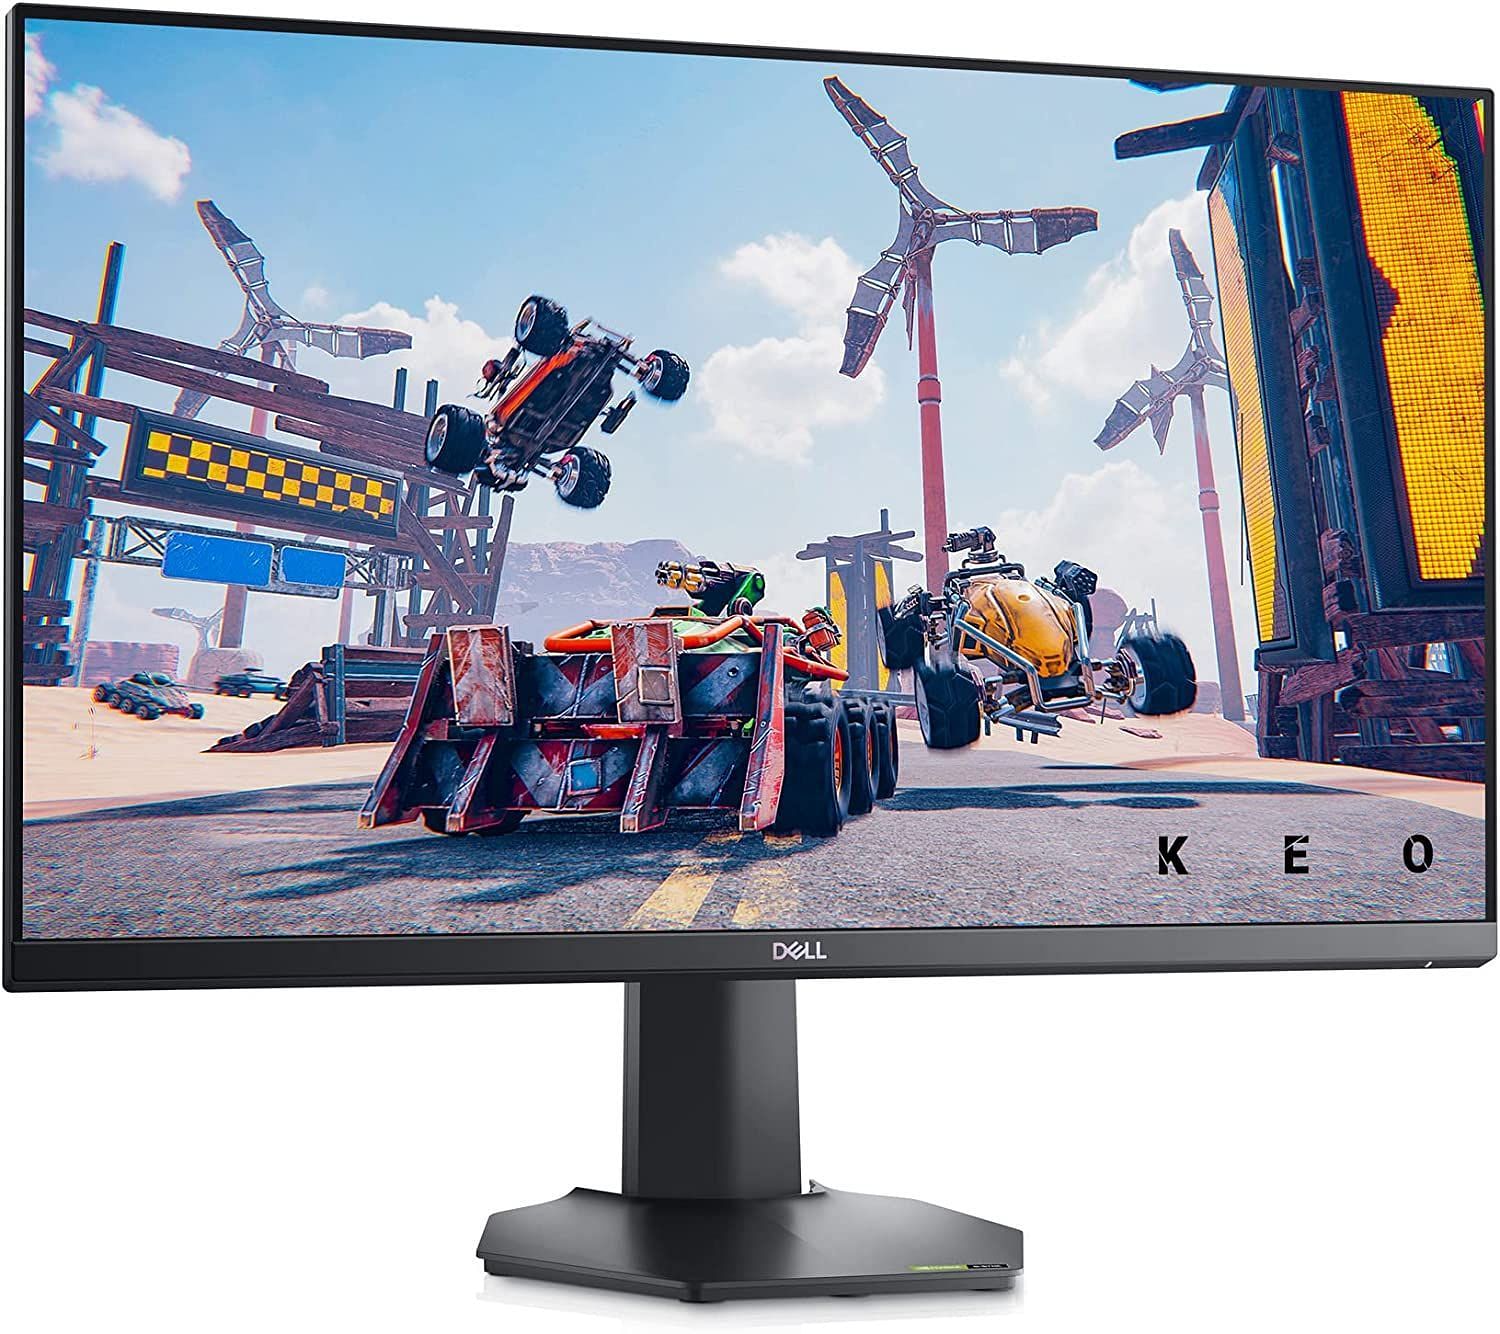 The Dell G2722HS 27-inch FHD 165 Hz IPS monitor (Image via Amazon)